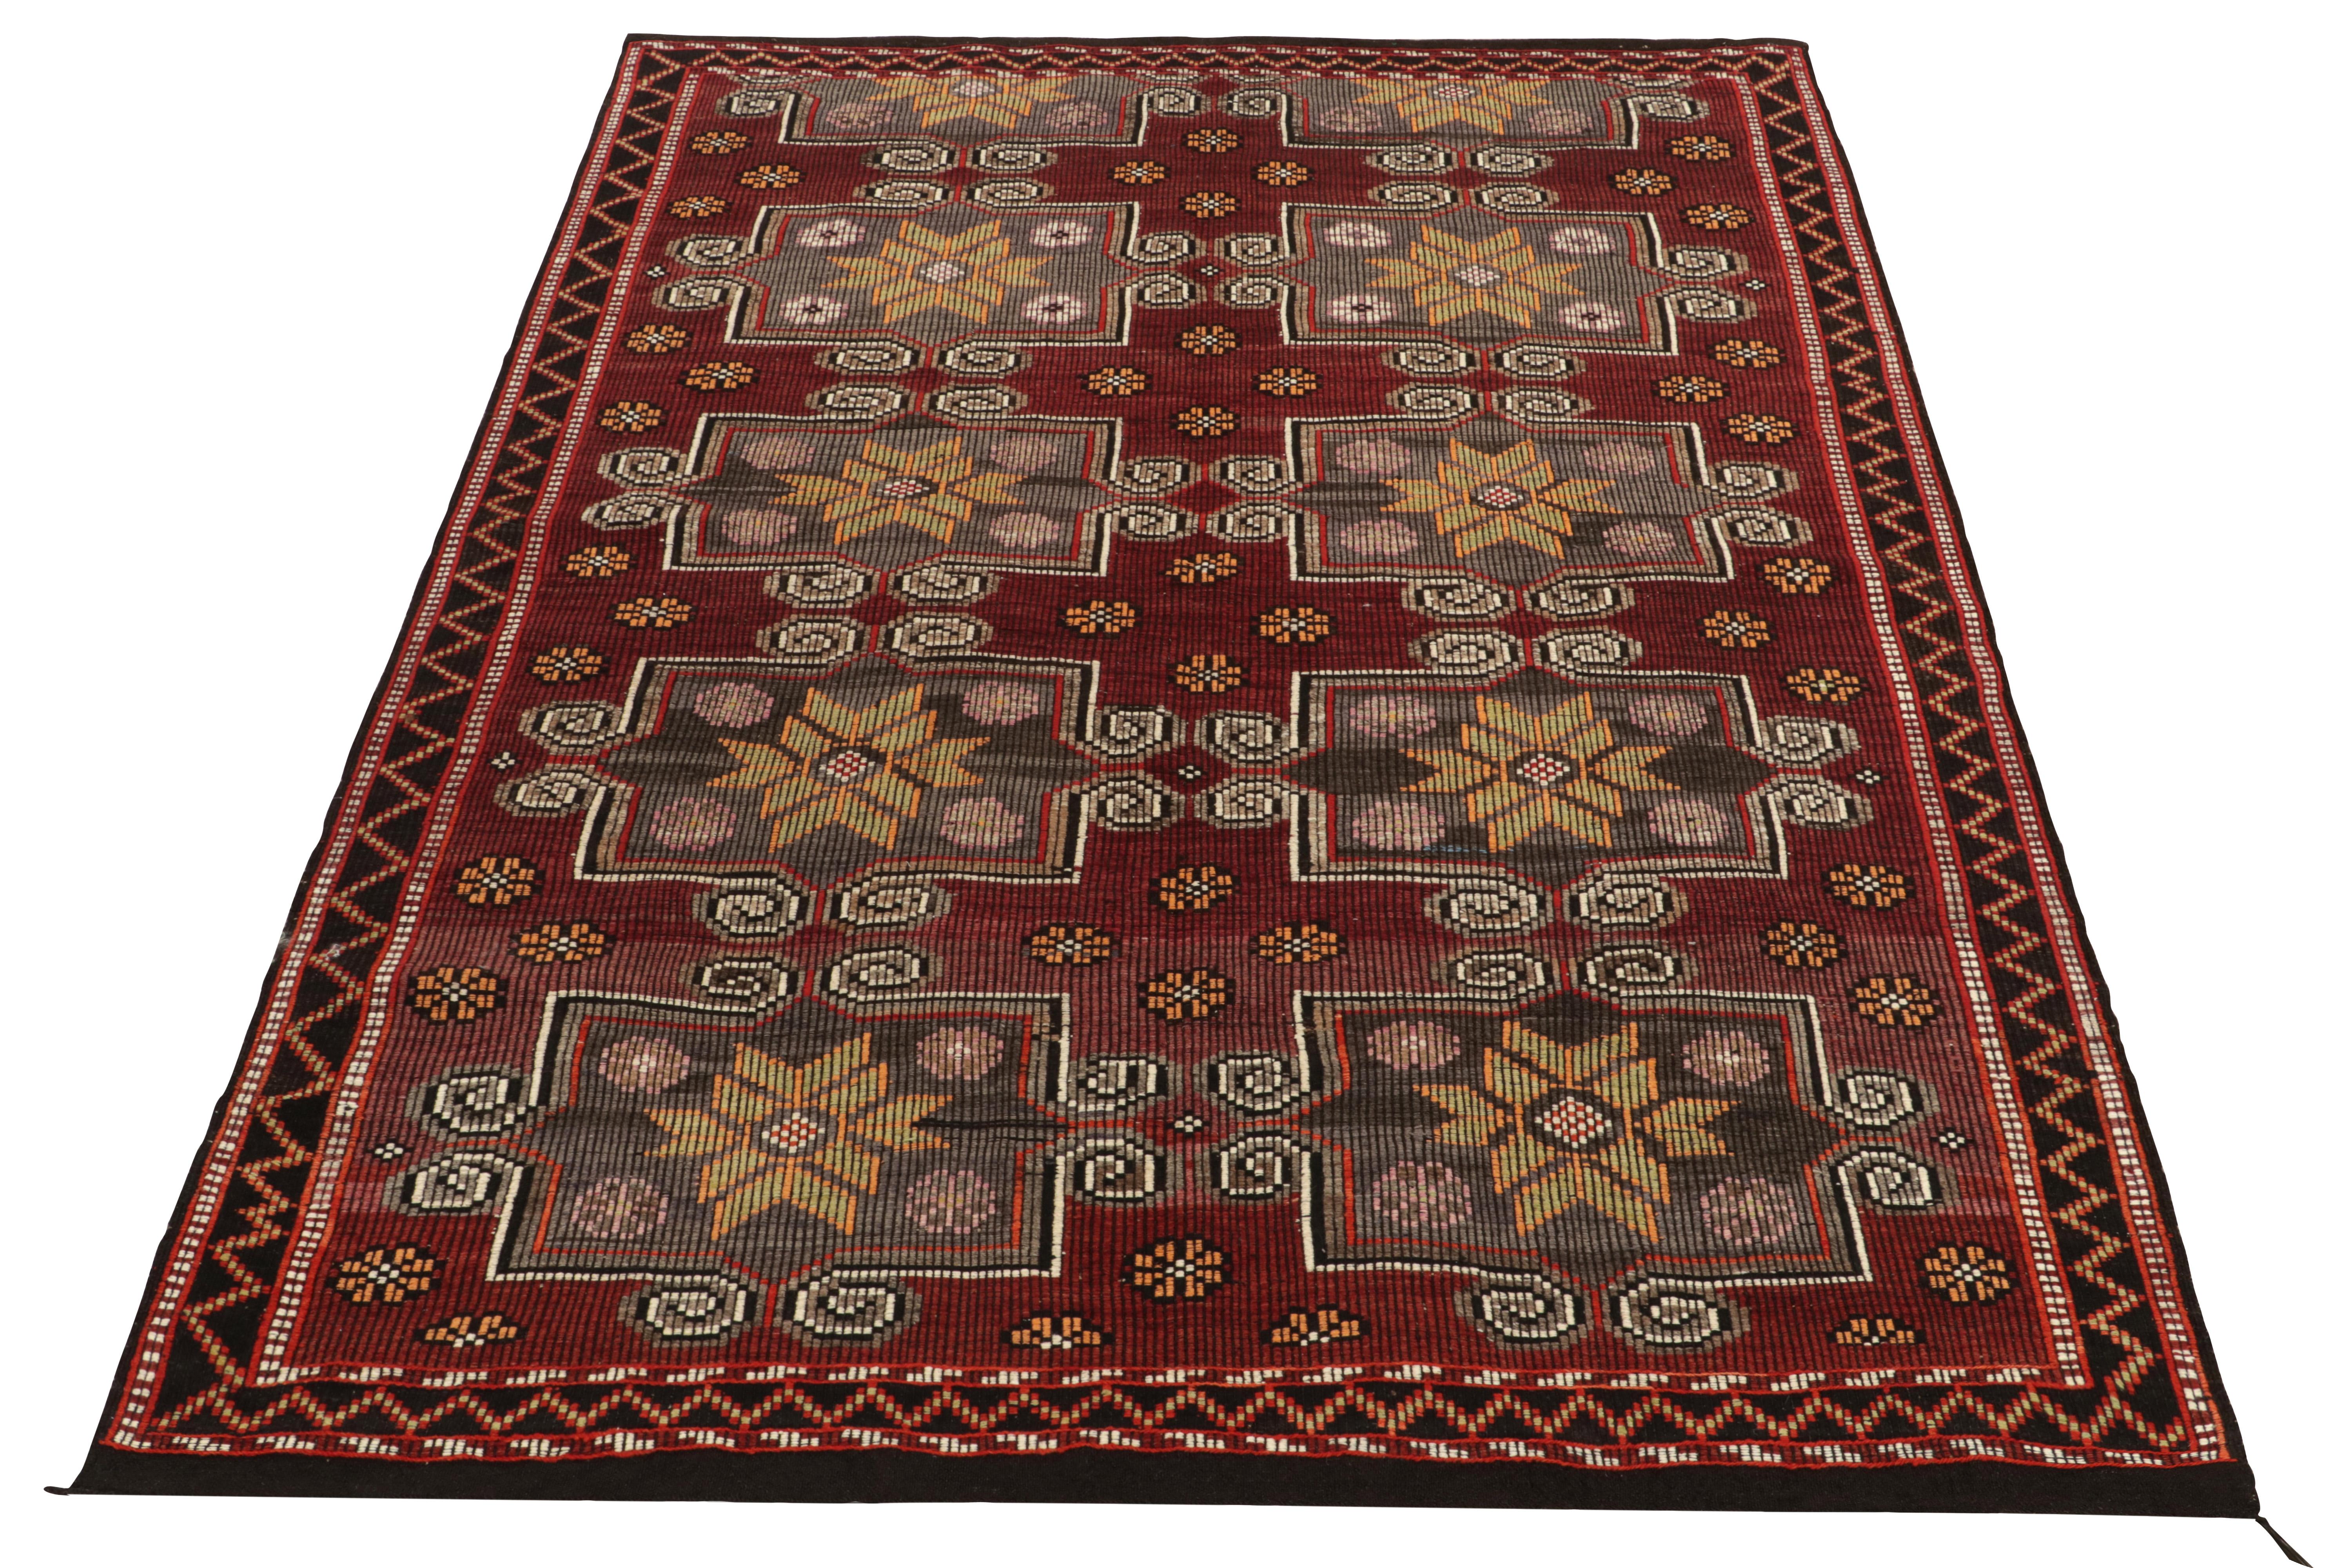 From the renowned vintage style, this 7x10 Chaput kilim enjoys a coveted position in our newest flatweave curations. 

This particular mid-century flatweave rug from Turkey enjoys impeccable embroidery & detailing in rich red, orange, brown &